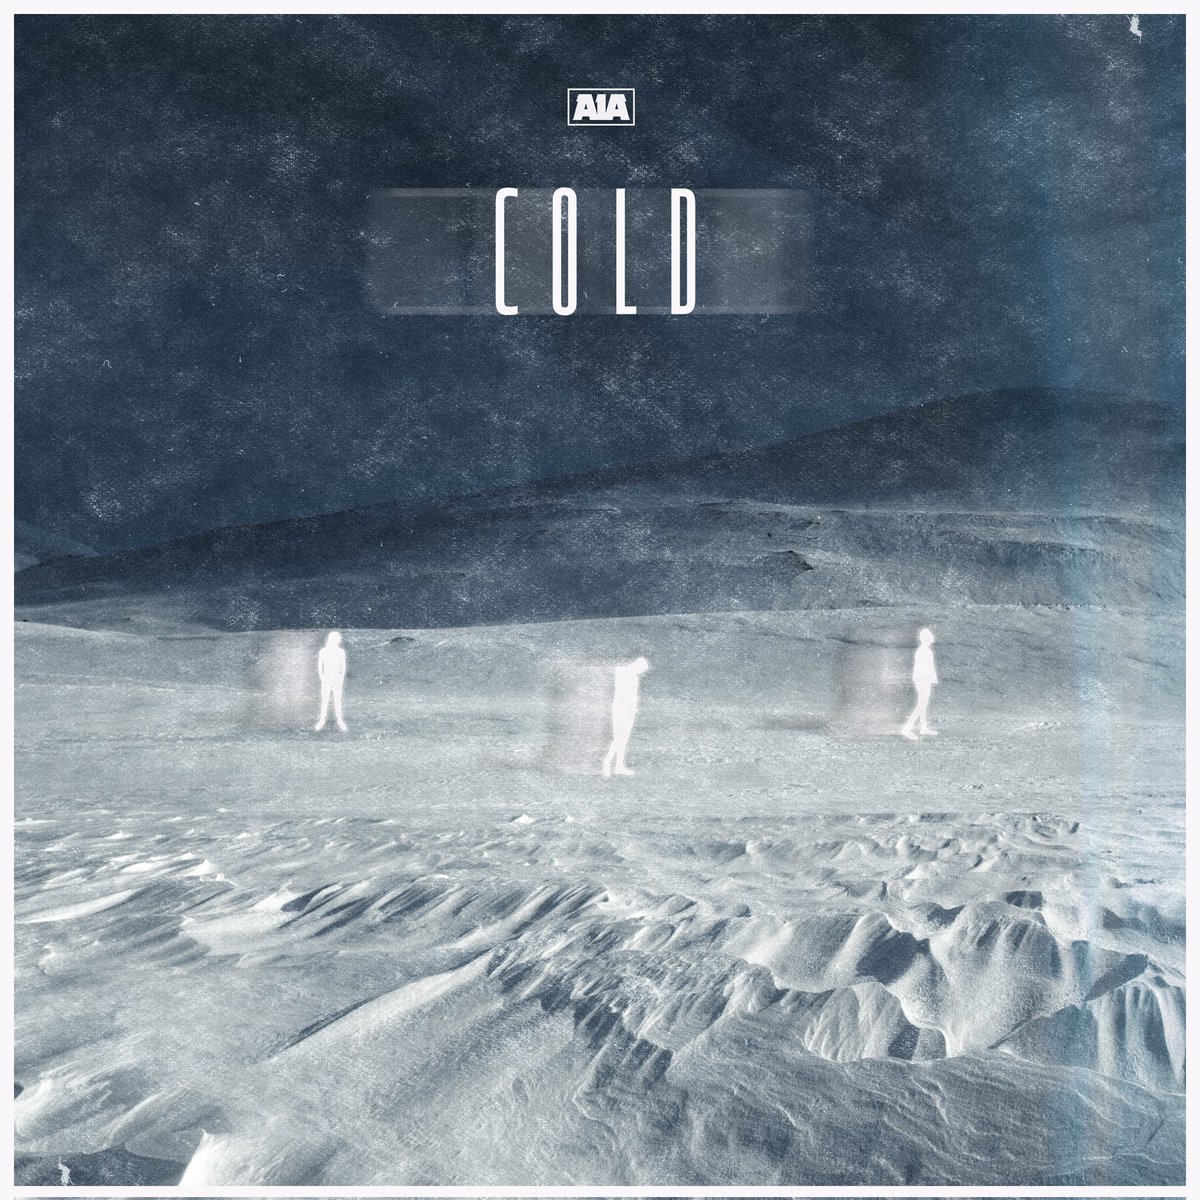 'Cold' is out on March 8th, new Arrows is HERE! You can pre-save the song now: stem.ffm.to/arrowsinaction…